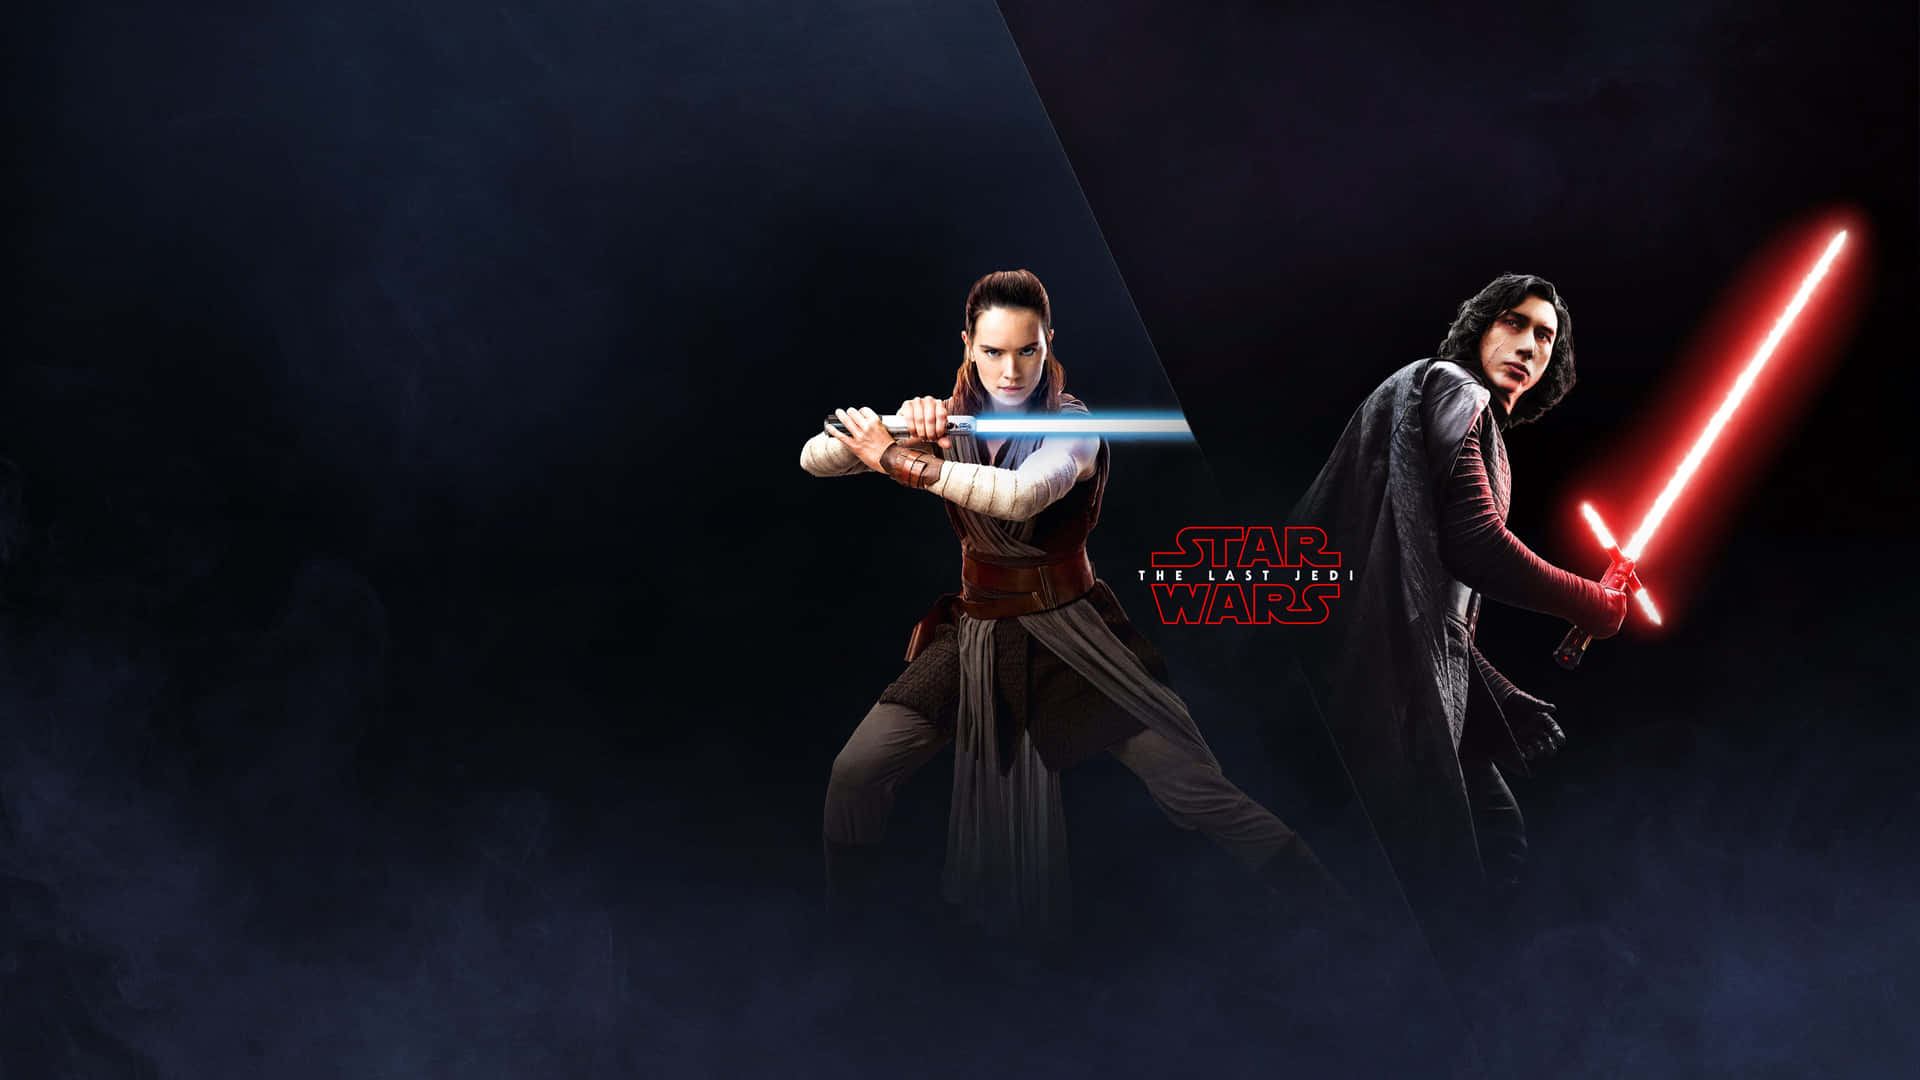 Rey, a resilient Star Wars heroine who taps into her Force powers Wallpaper